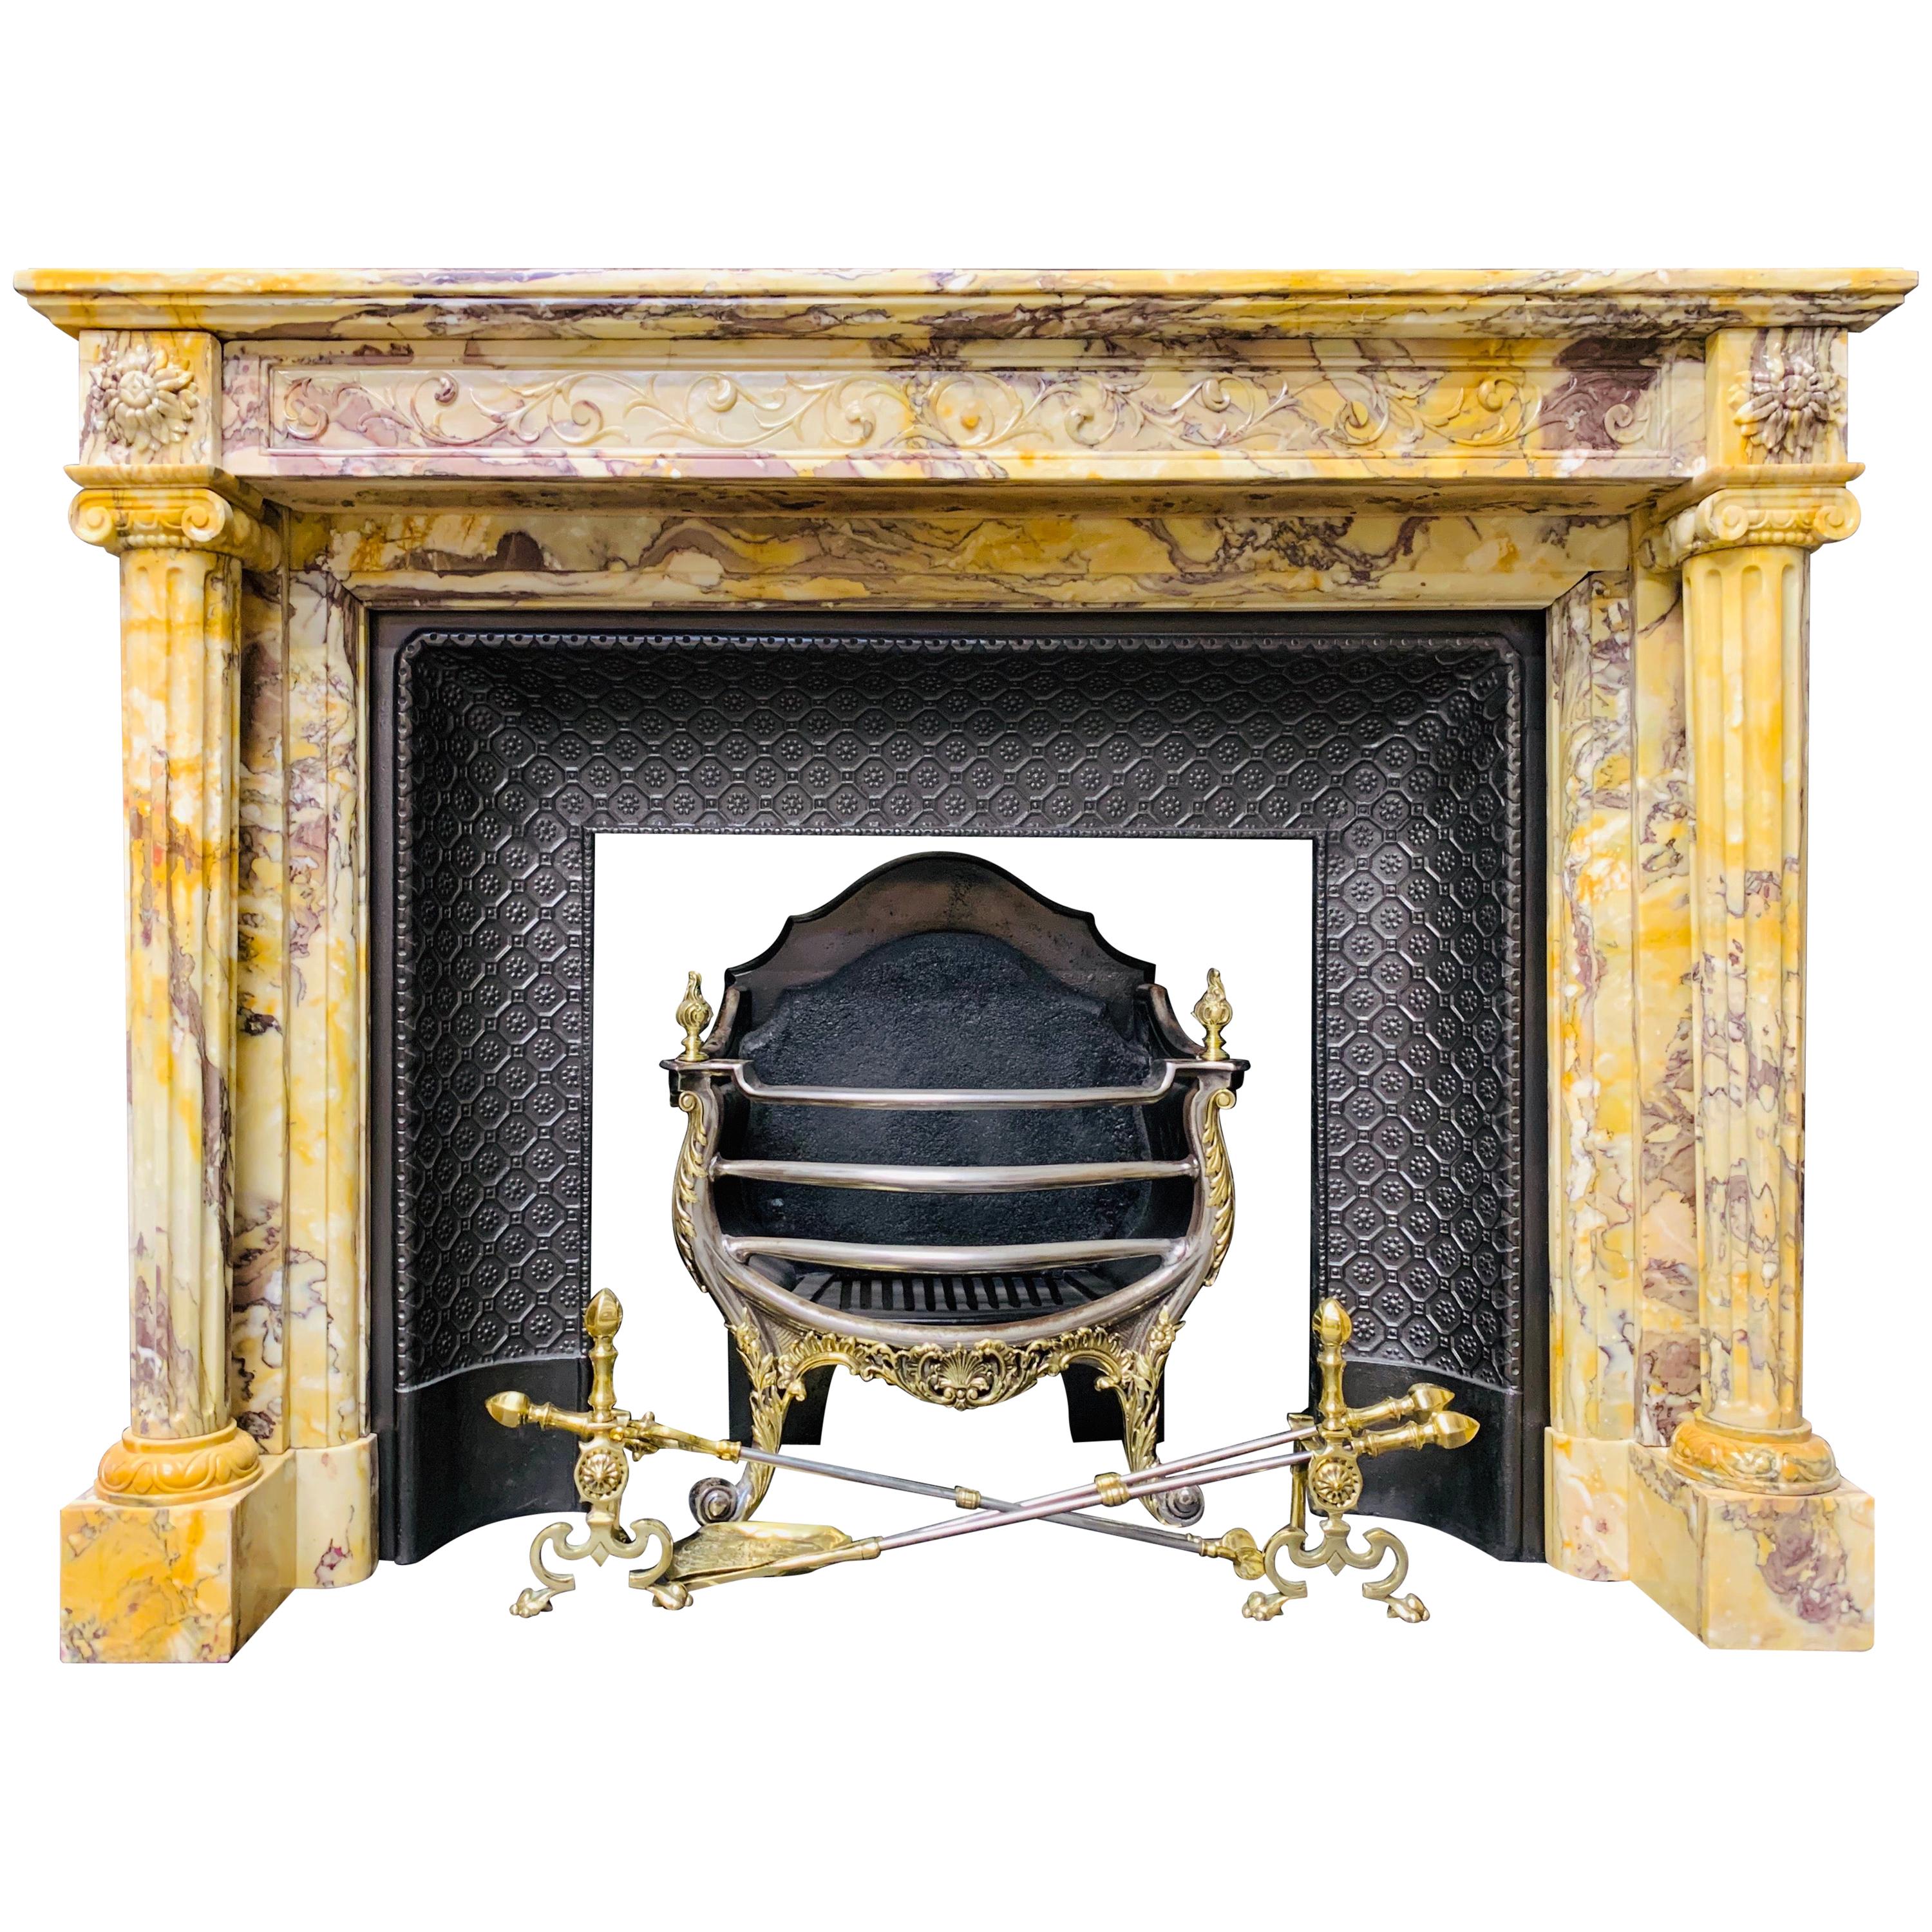 Mid-19th Century French Neoclassical Giallo di Siena Marble Fireplace Surround For Sale